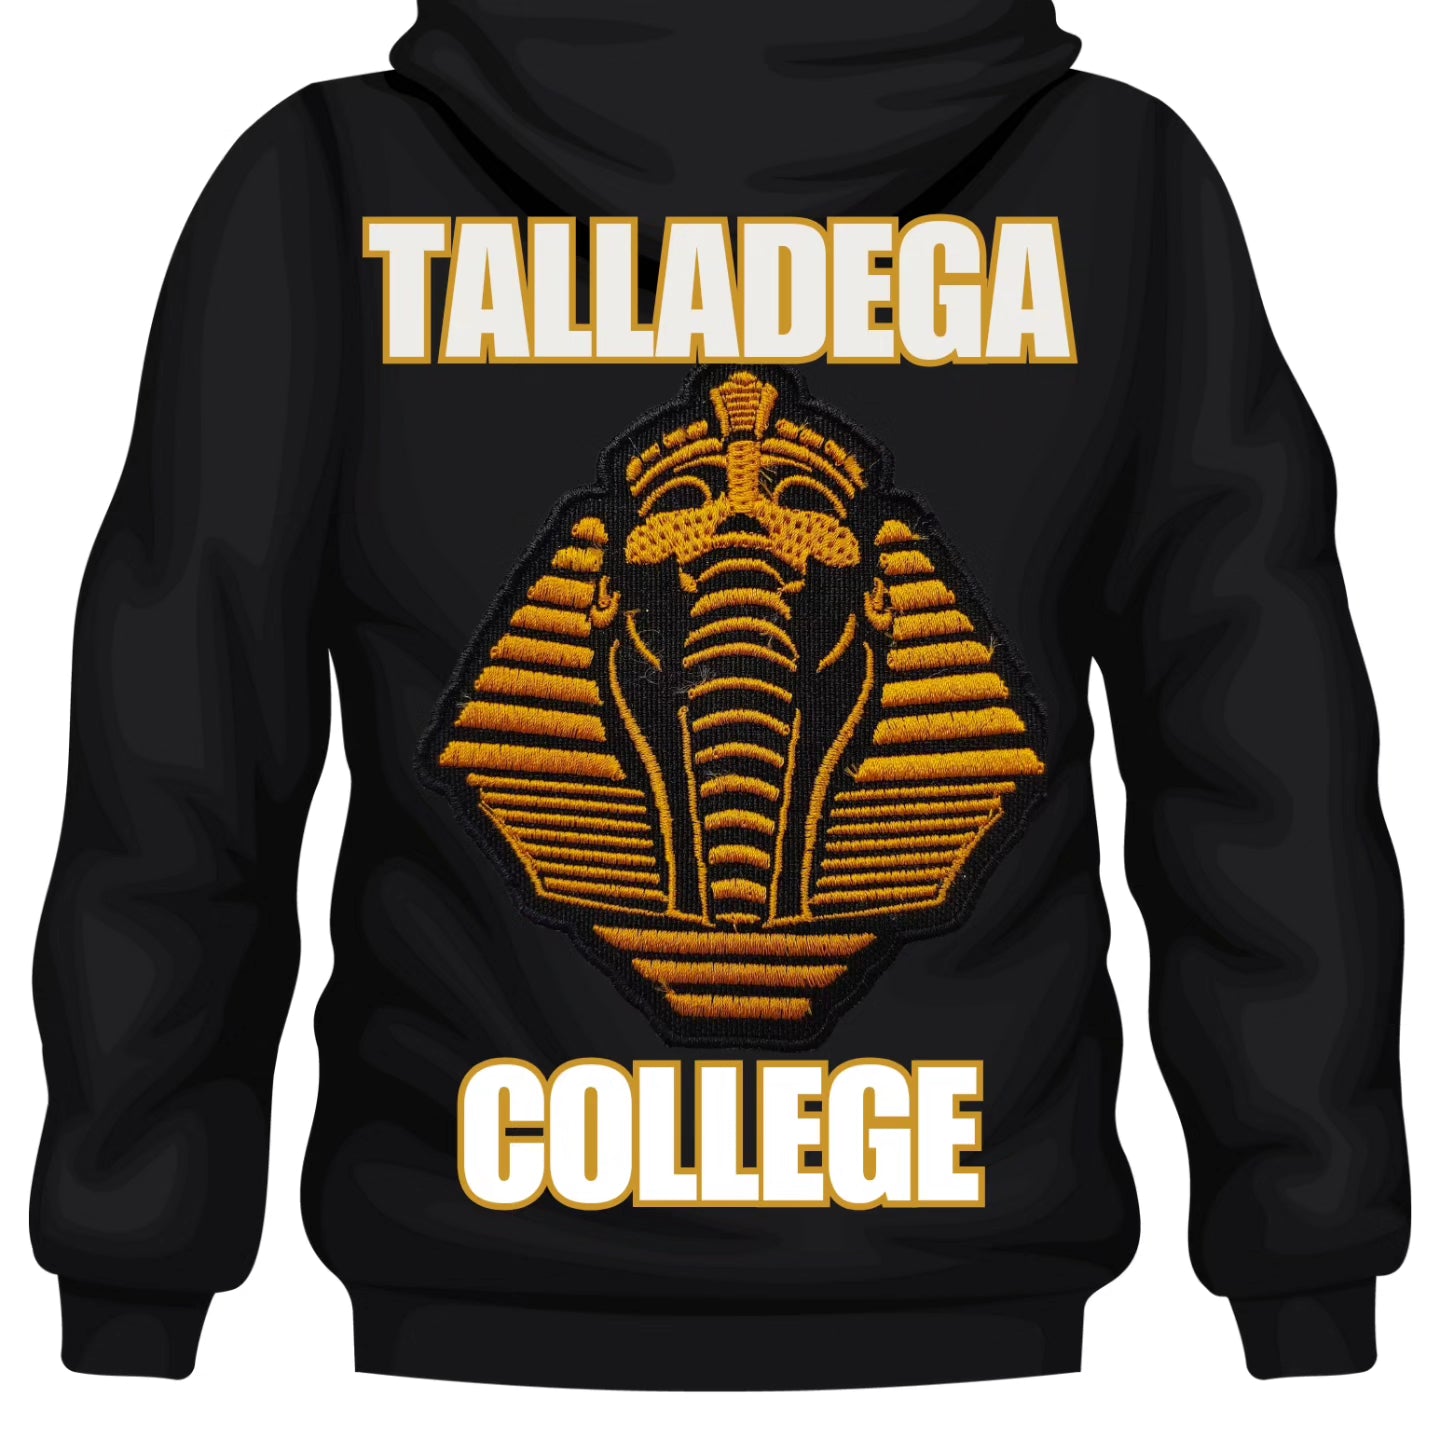 Alpha Beta Chapter hoodie PERSONALIZED